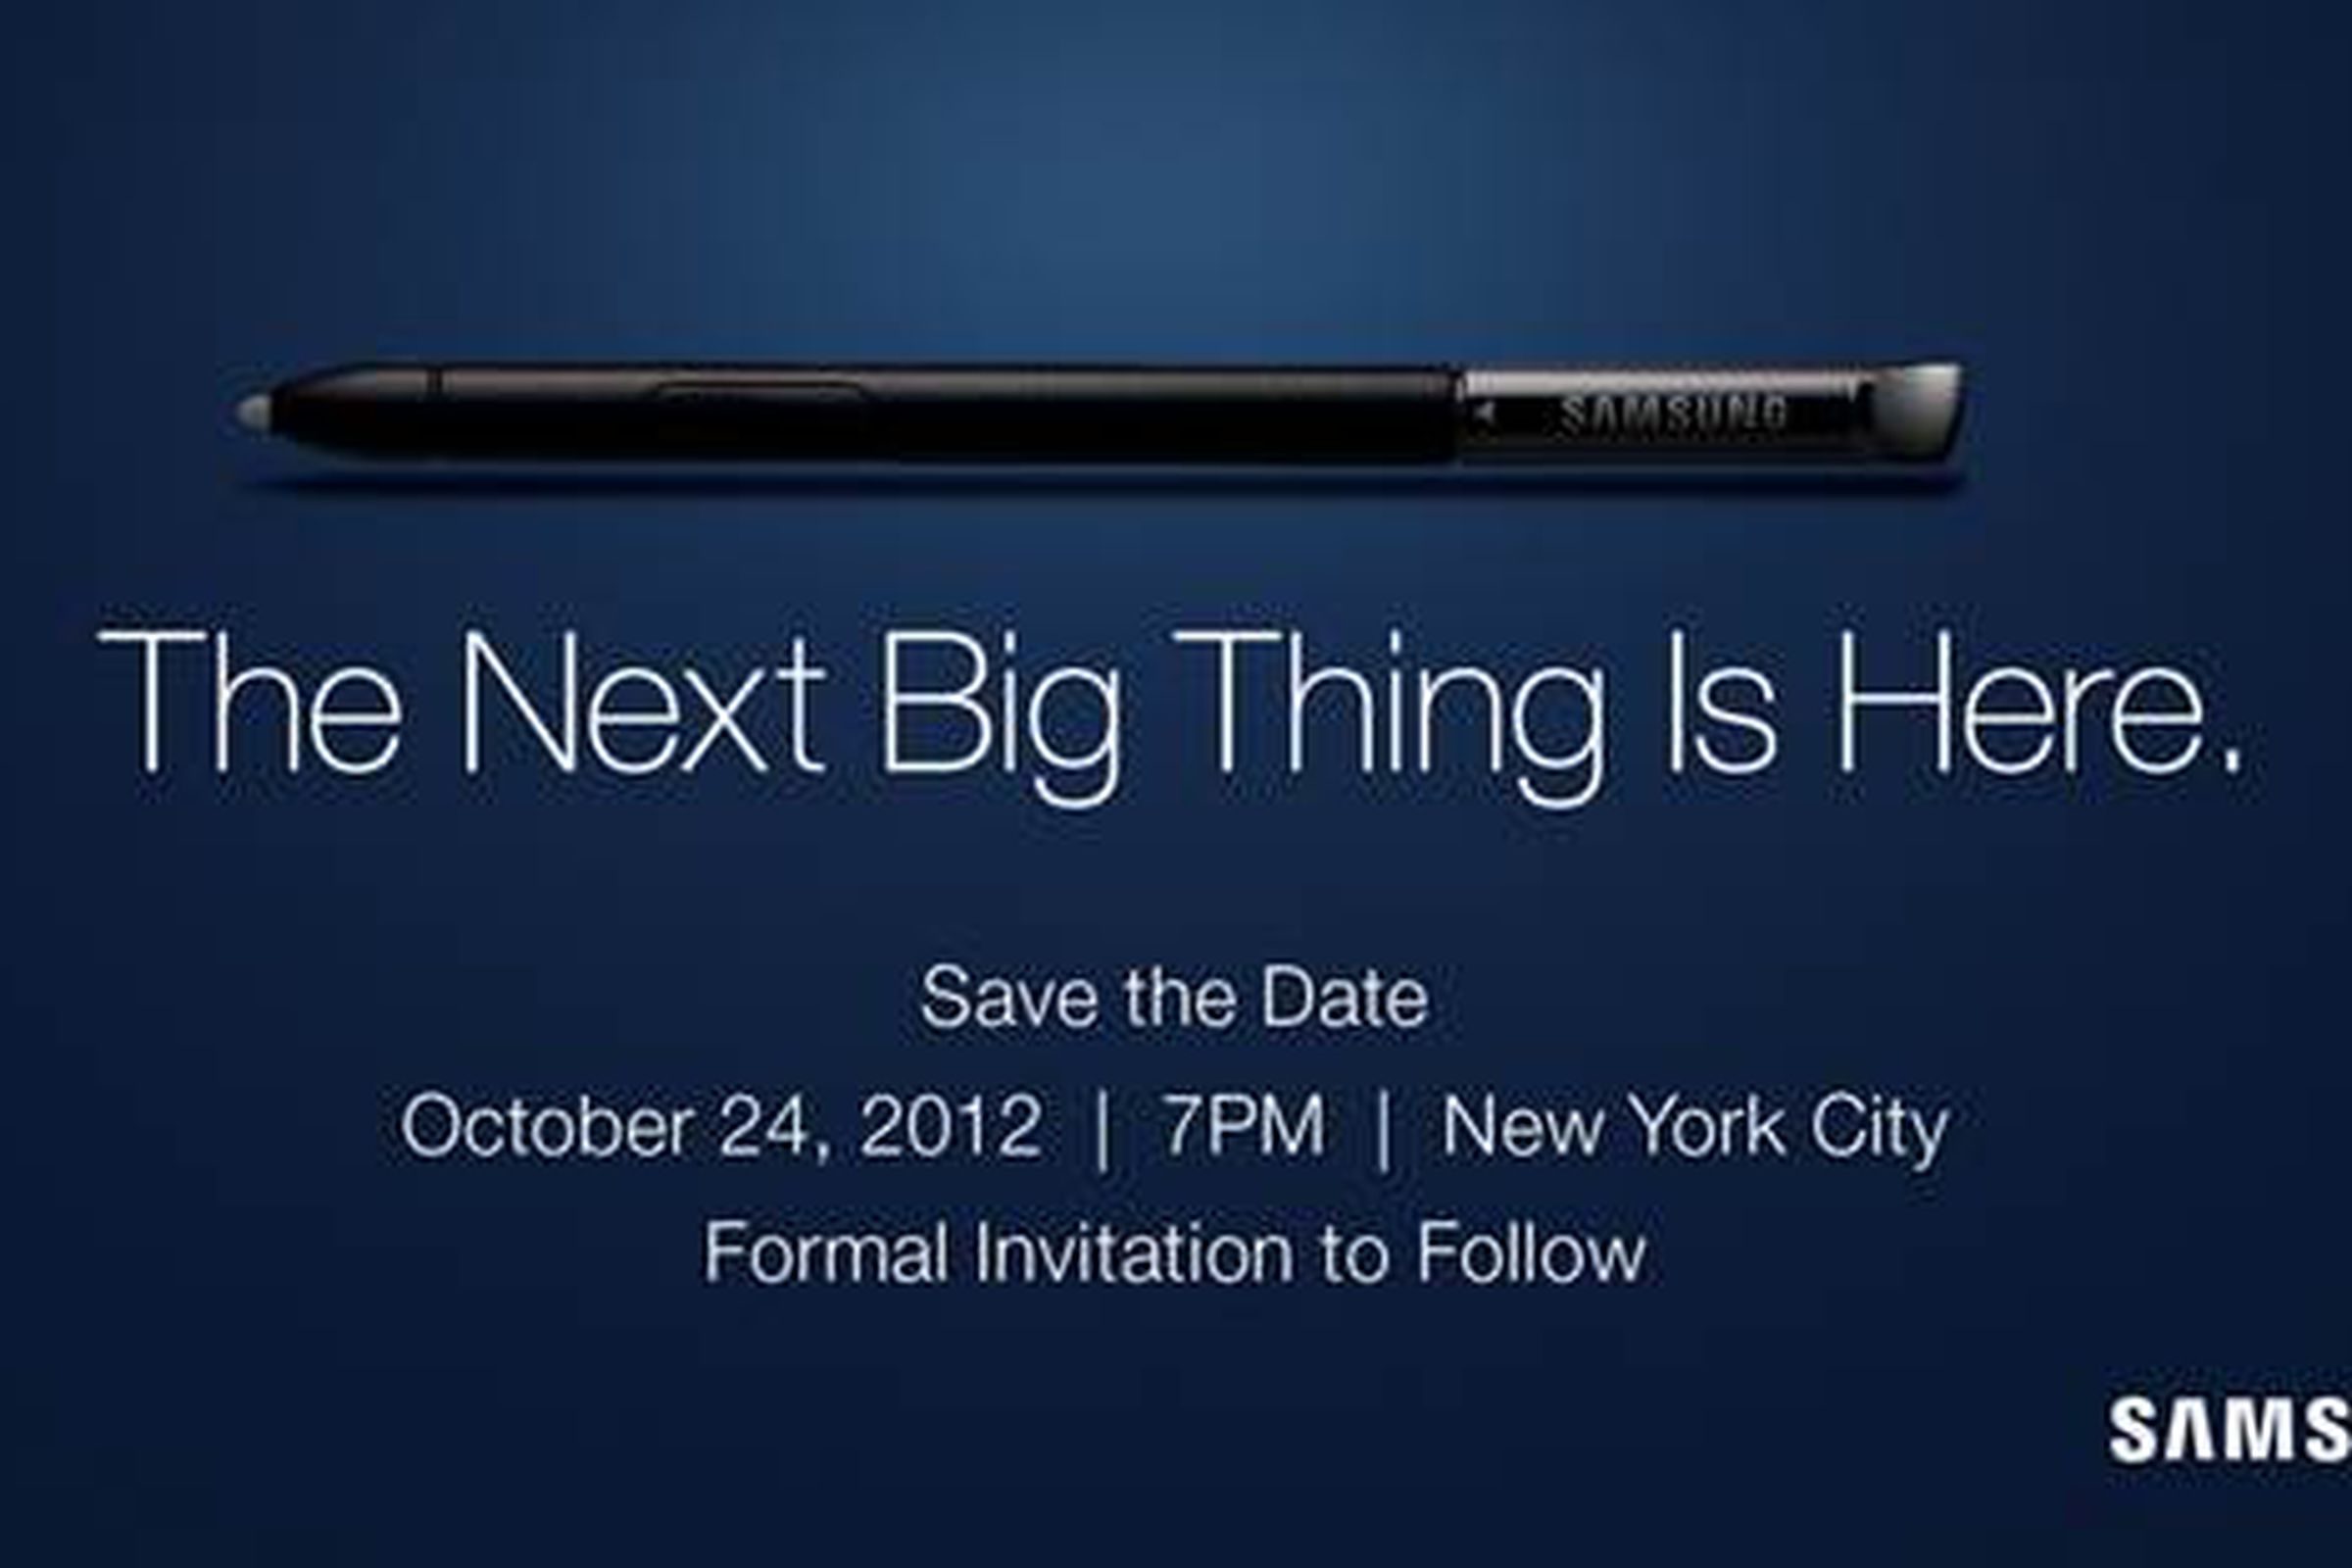 Samsung Galaxy Note Oct. 24th Save the Date